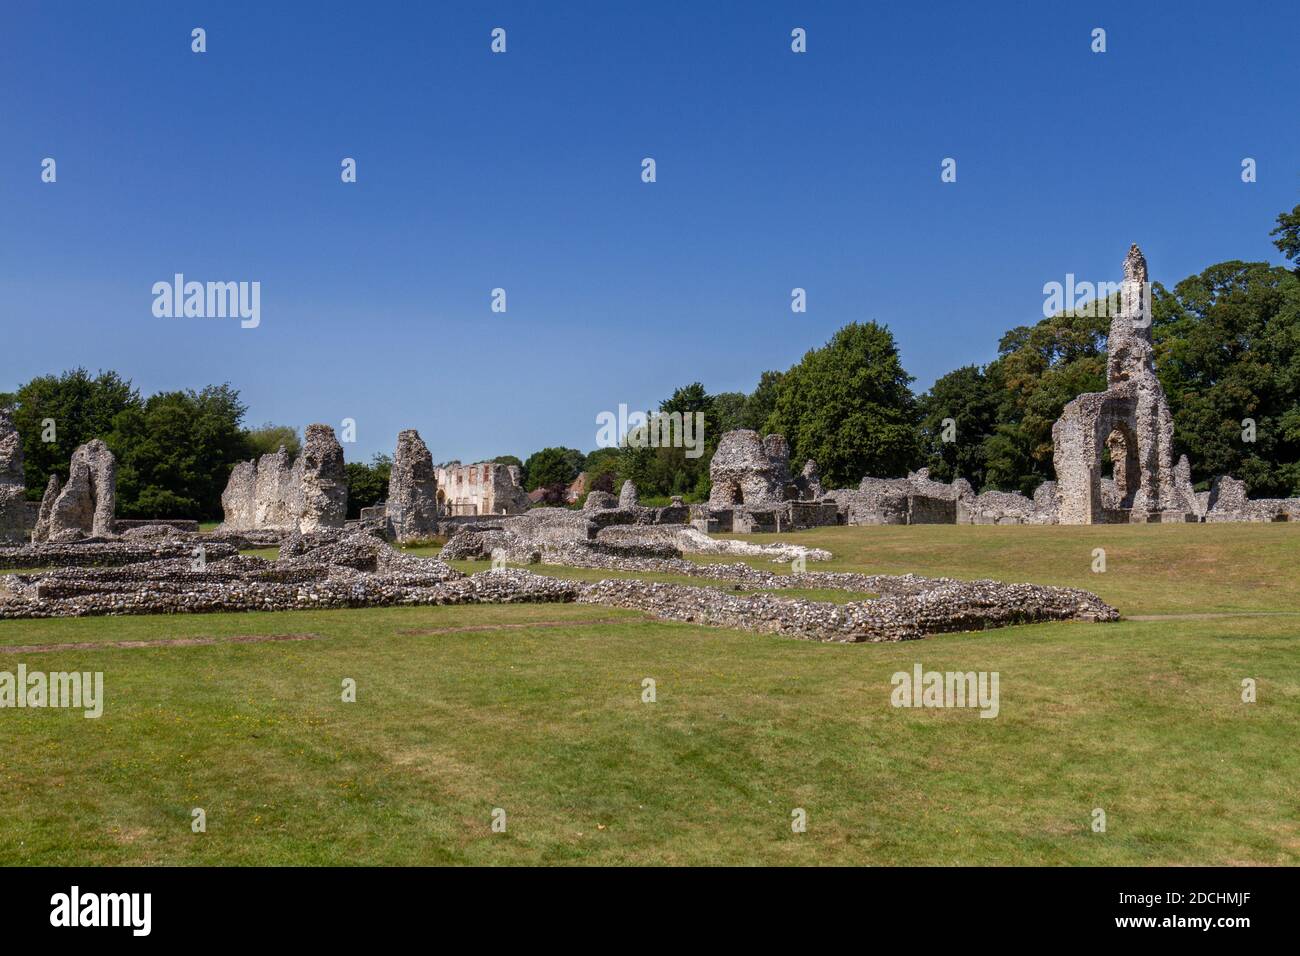 The remains of Thetford Priory, a Cluniac monastic house in Thetford, Norfolk, England. Stock Photo